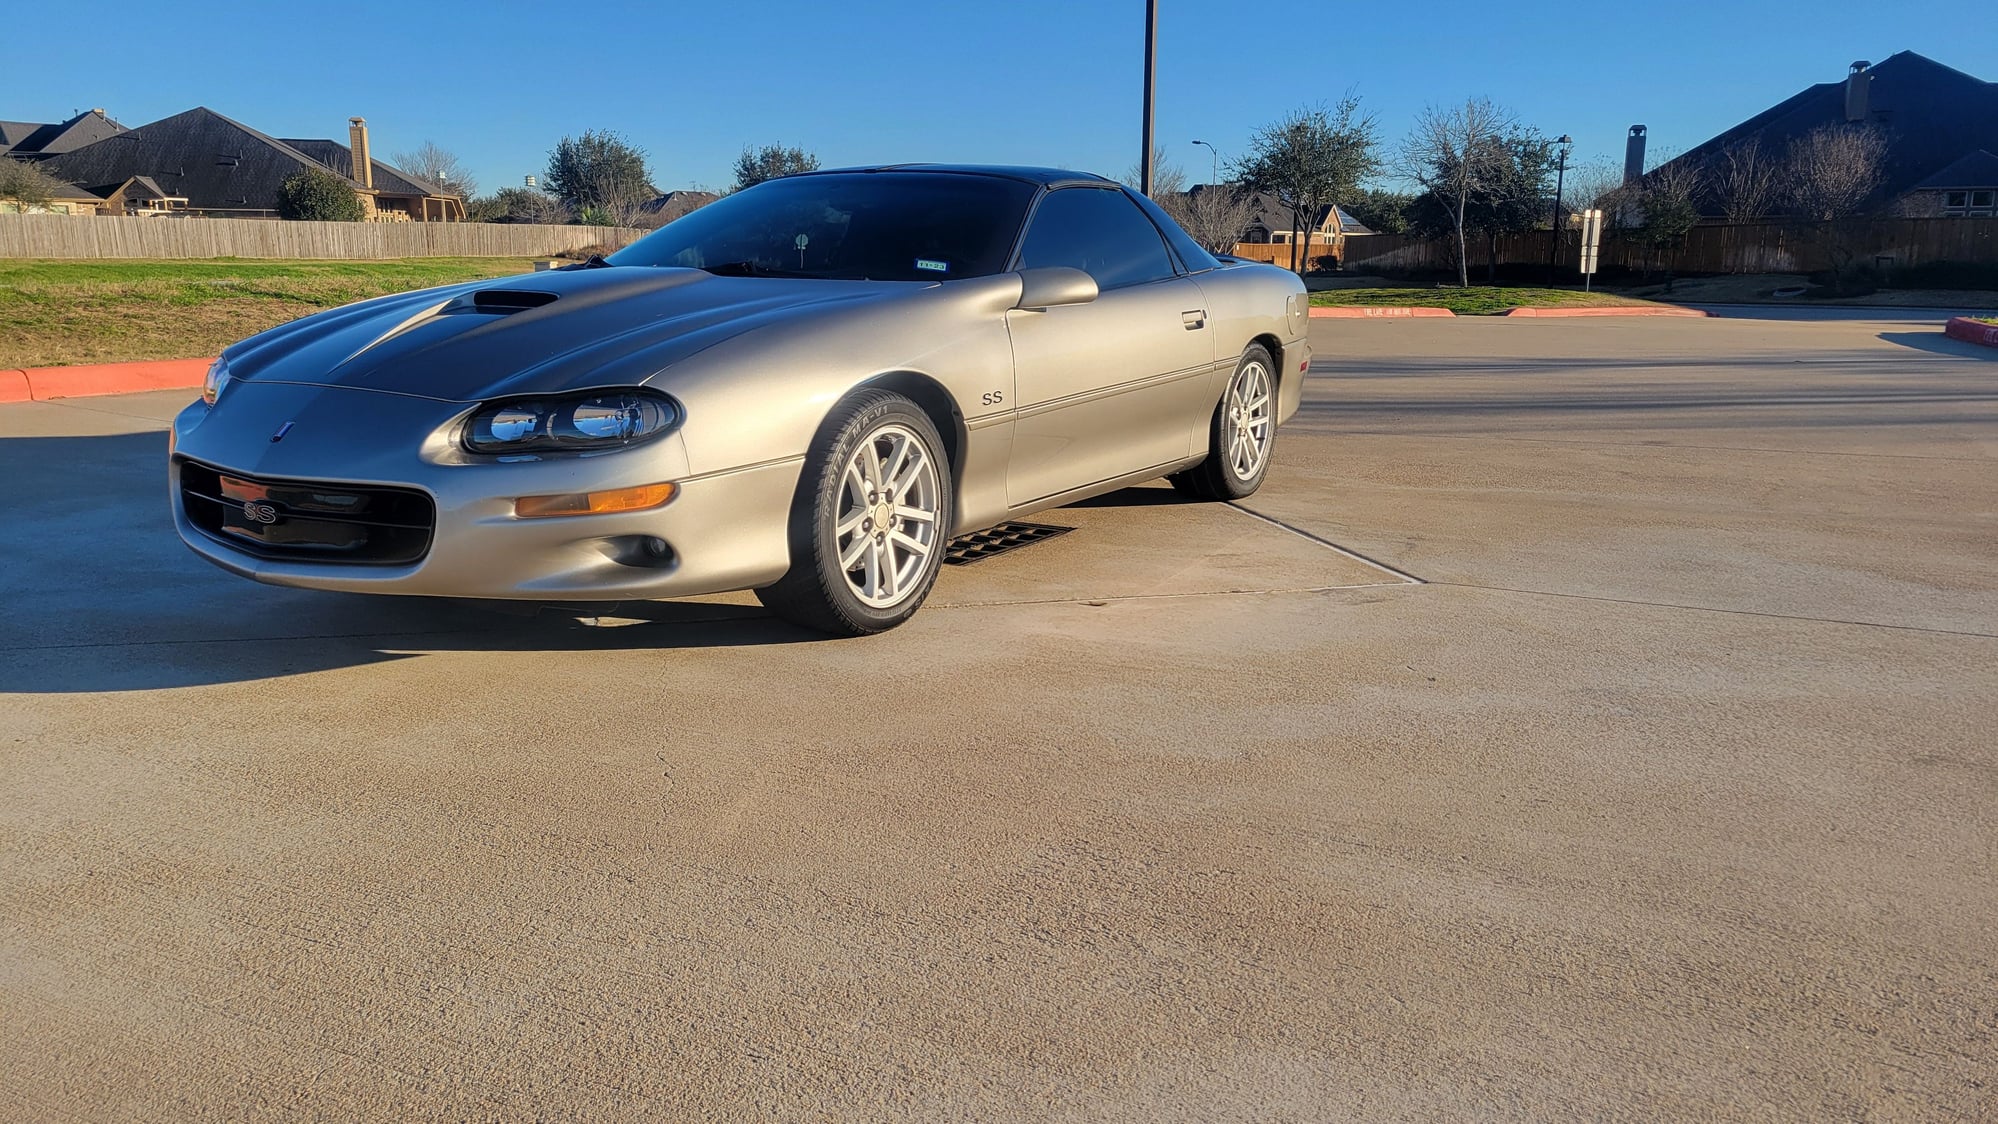 2002 Chevrolet Camaro - 2002 Camaro SS TTop Coupe - Used - VIN 2G1FP22G222104477 - 97,000 Miles - 8 cyl - 2WD - Automatic - Coupe - Beige - Katy, TX 77494, United States